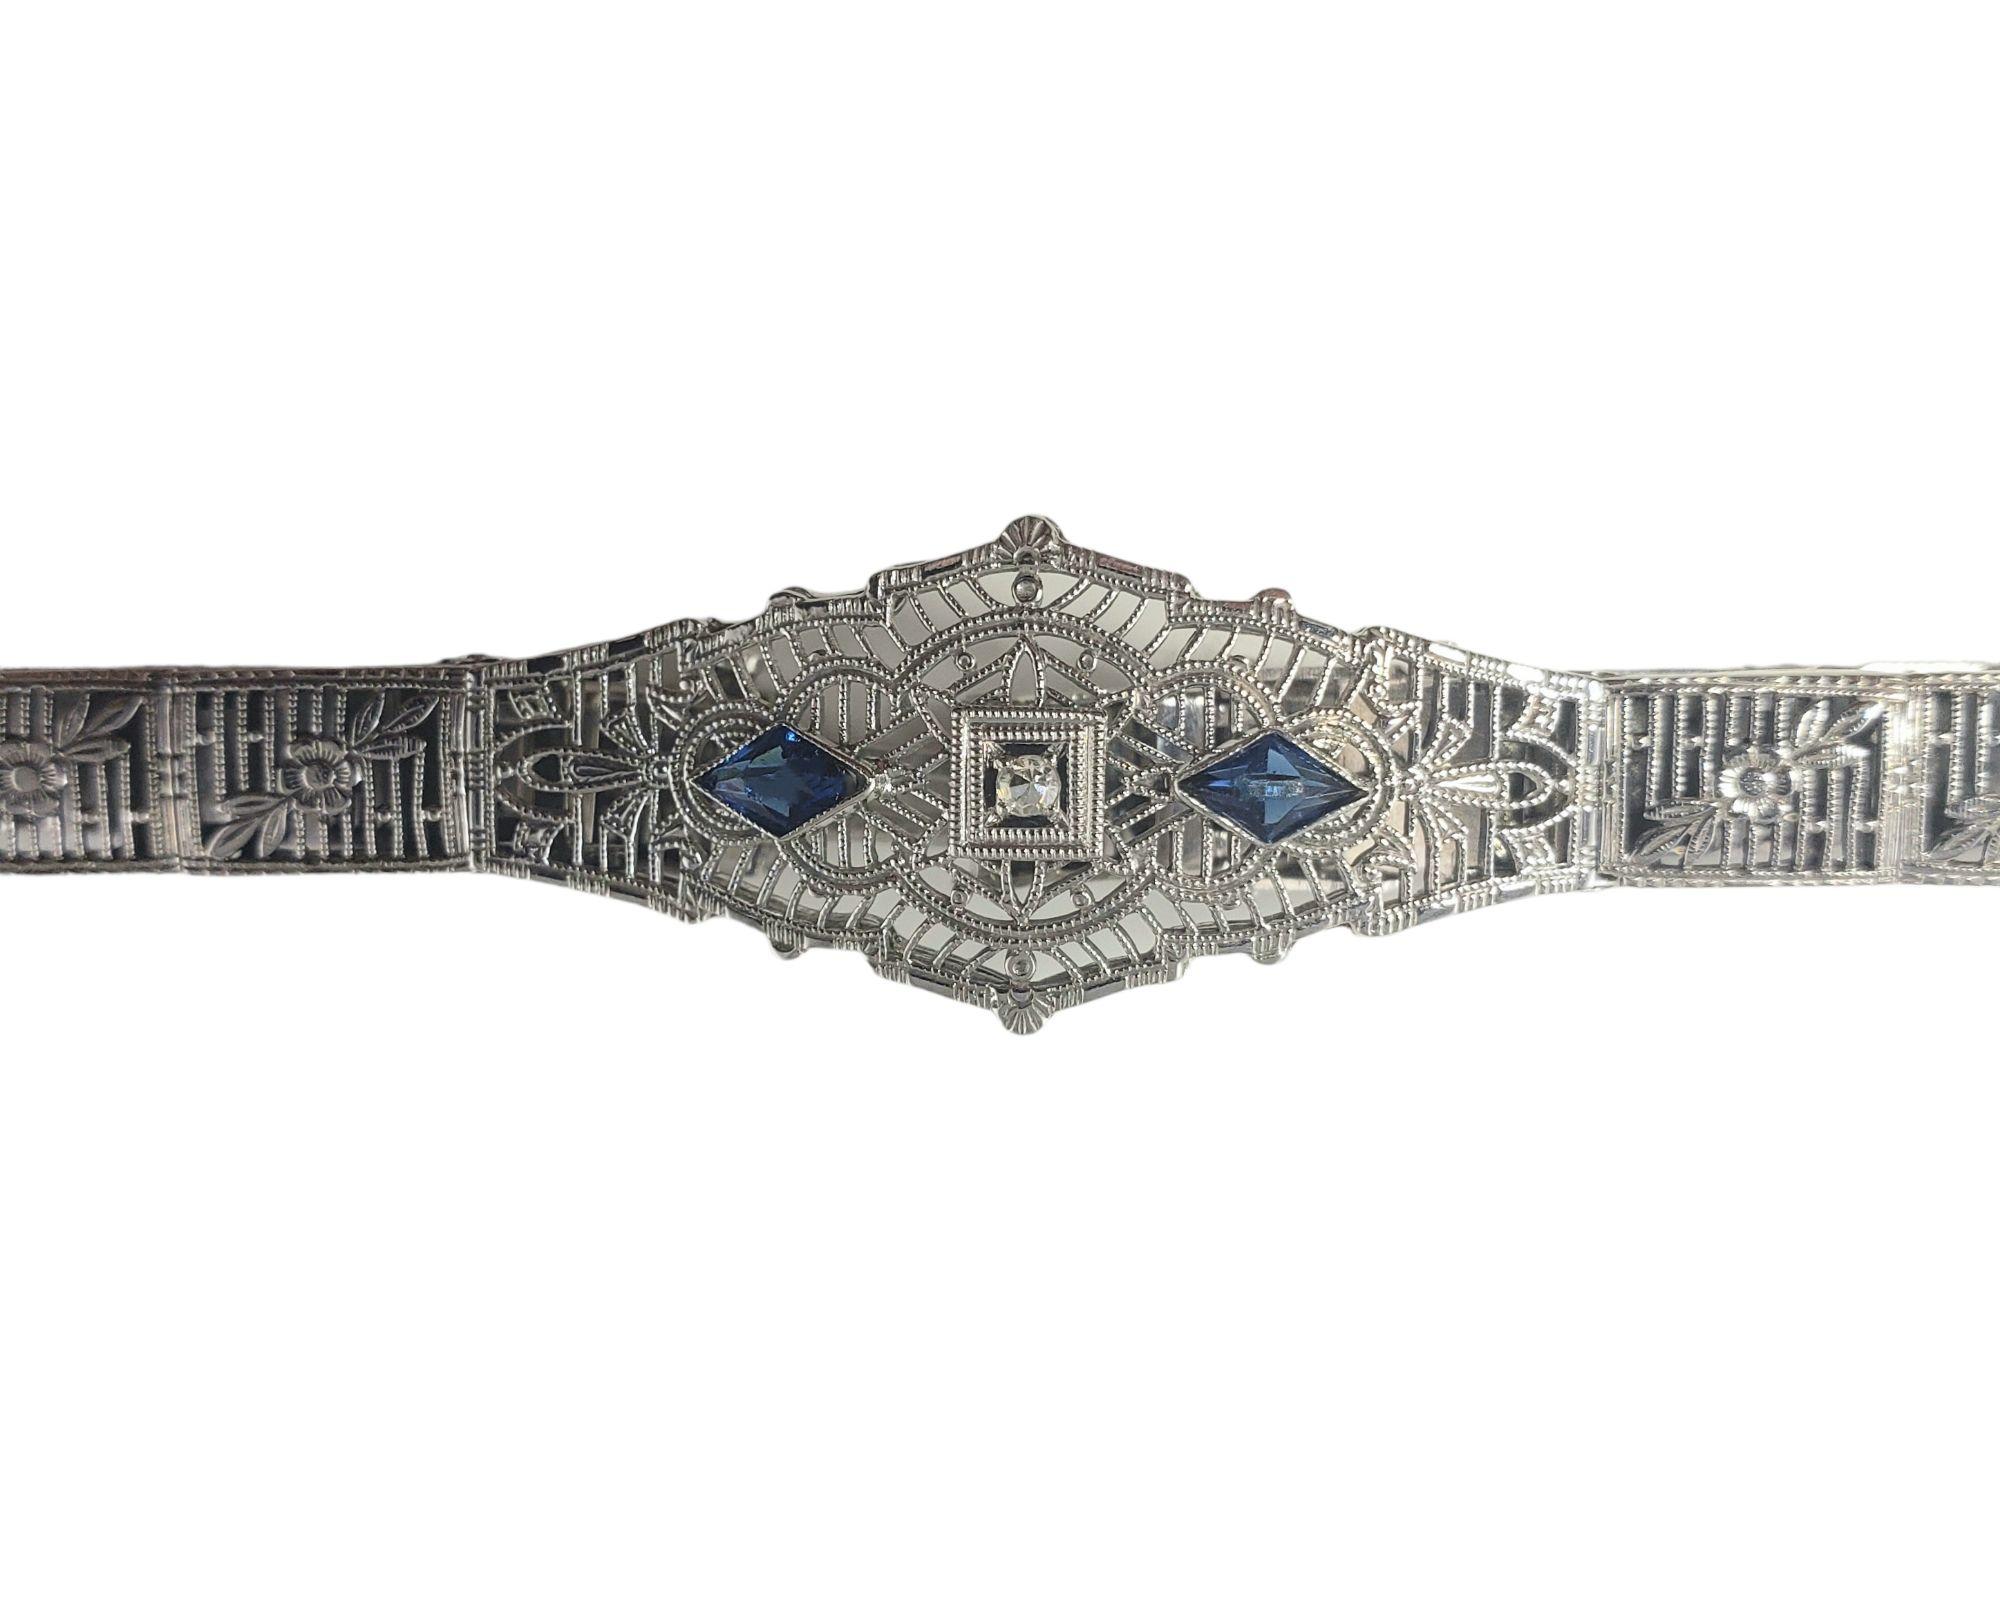 Vintage 10 Karat White Gold Filigree Diamond and Blue Glass Bracelet-

This lovely bracelet features one round single cut diamond and two blue glass pieces set in beautifully detailed 10K white gold filigree. Width: 15 mm.

Approximate diamond